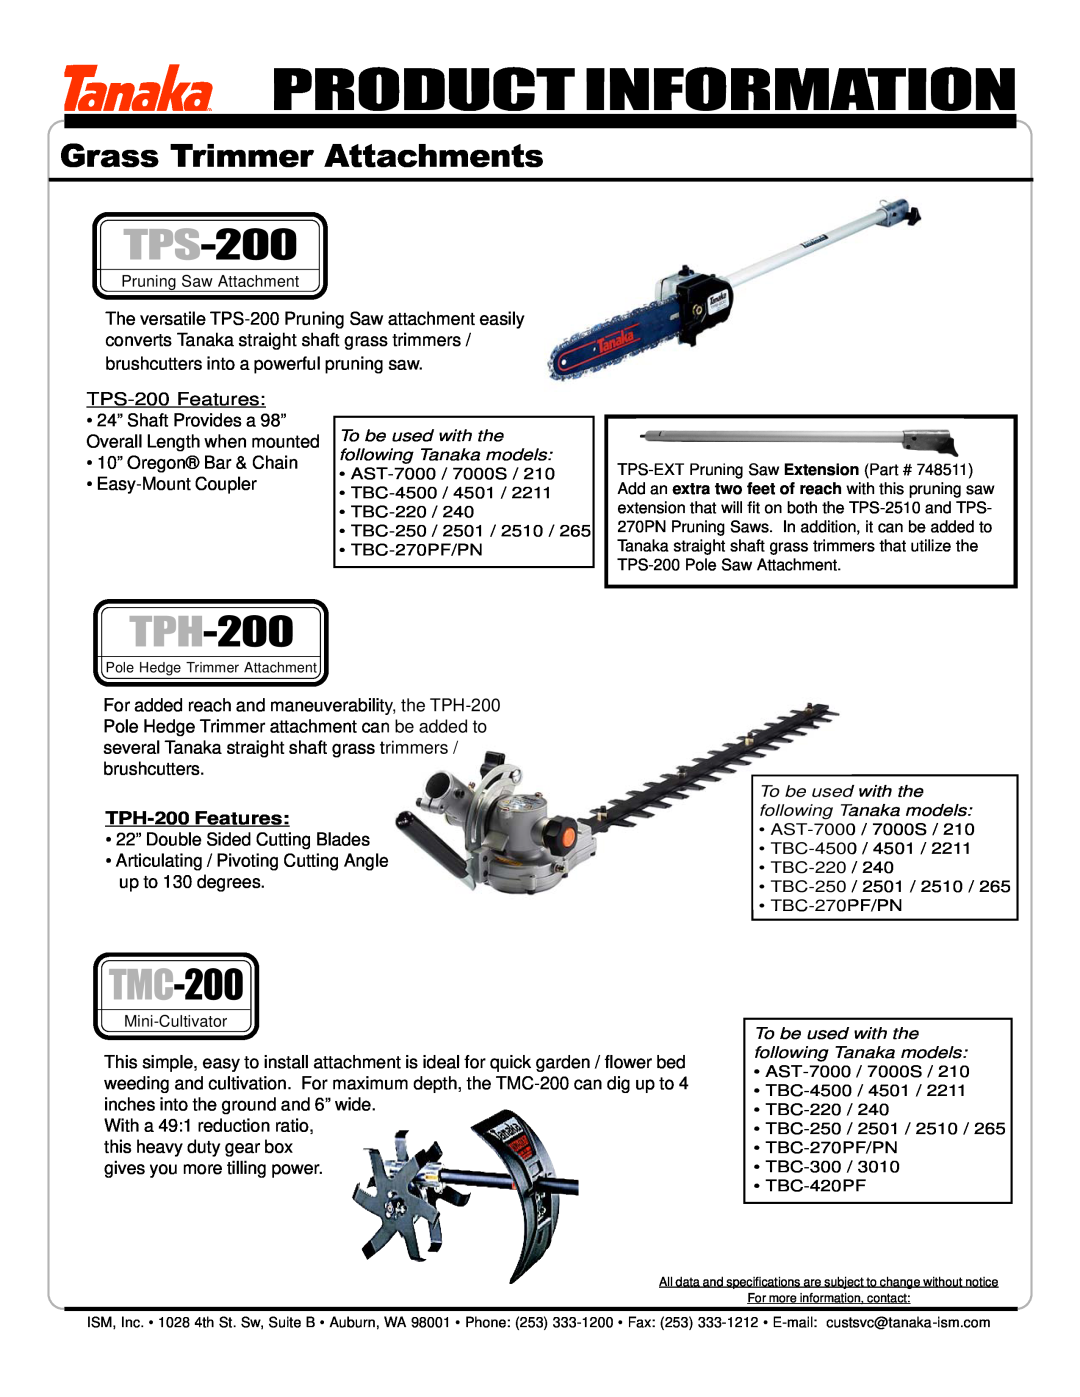 Tanaka TBC-4501 manual Product Information, TPS-200, TMC-200, Grass Trimmer Attachments, TPH-200Features 